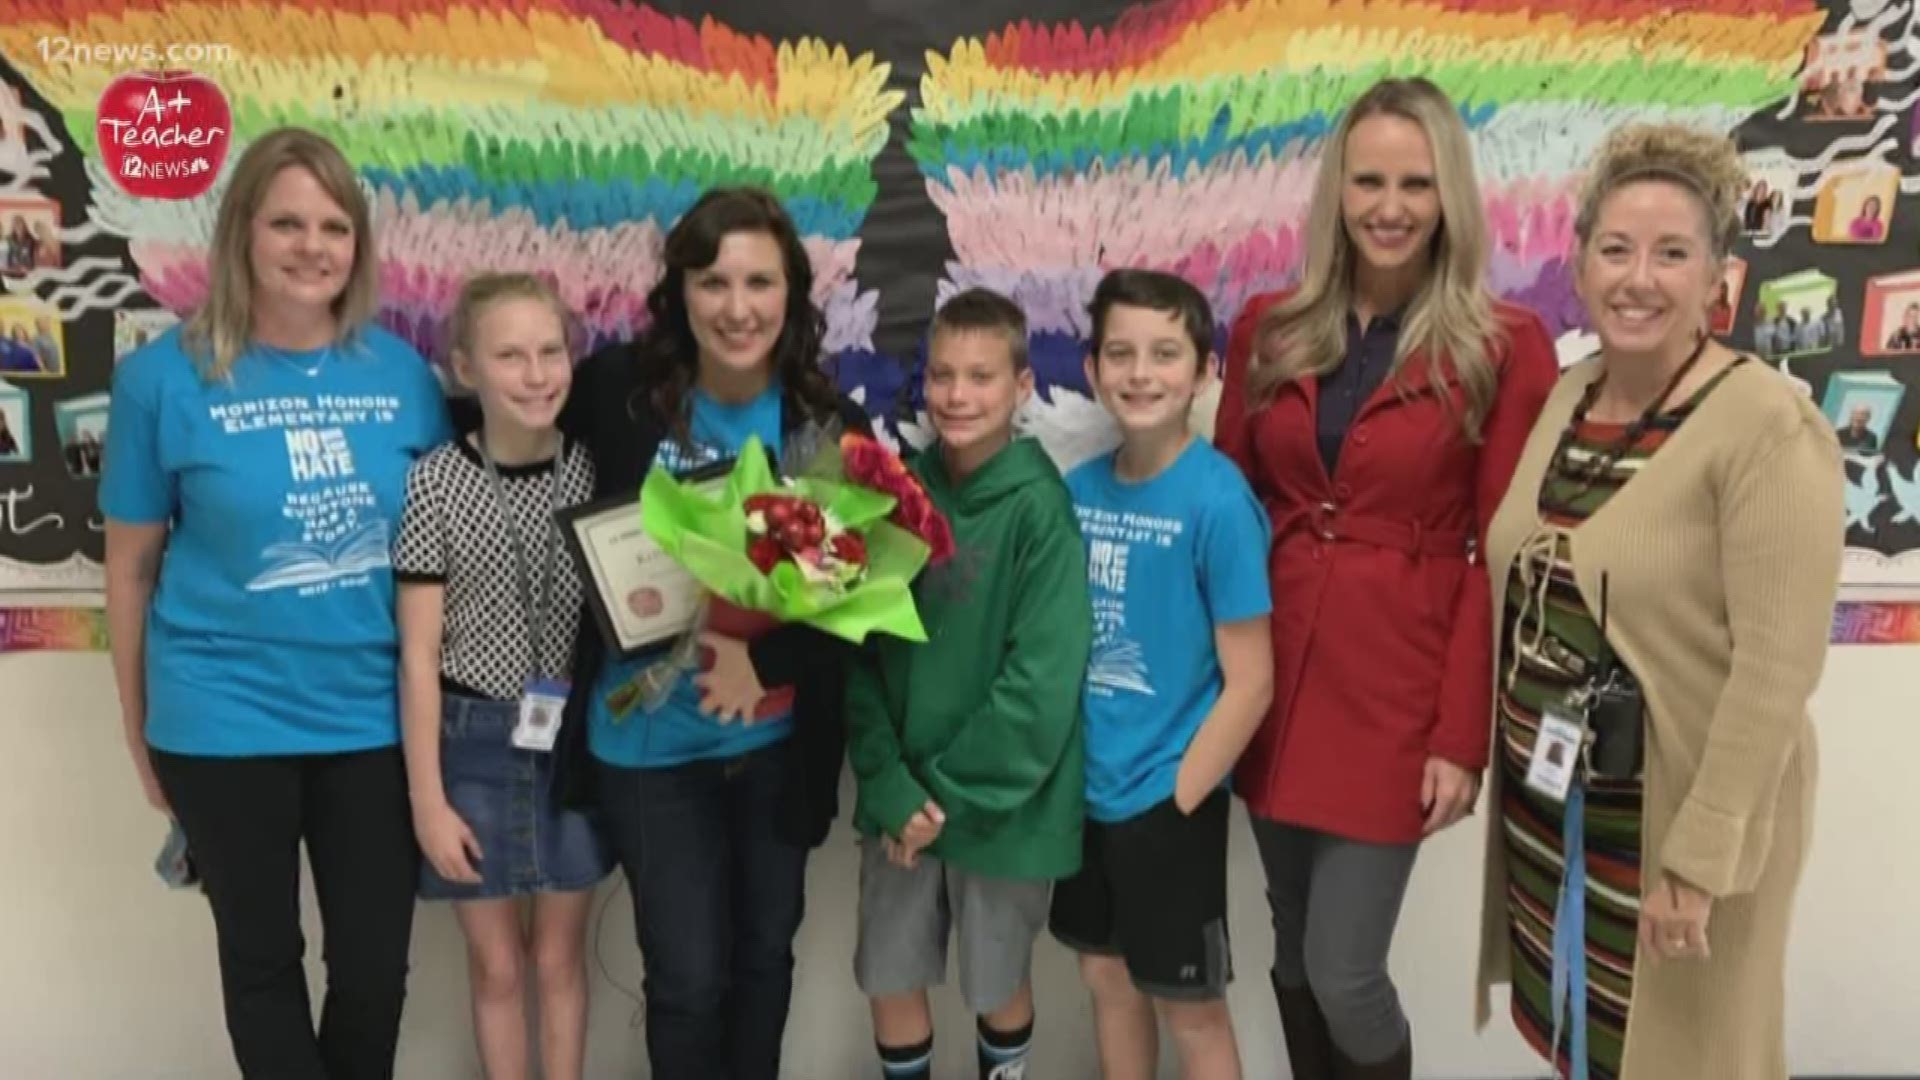 Trisha Hendricks introduces us to Kelly Maguire, a special teacher at Horizon Honors Elementary School in Phoenix.